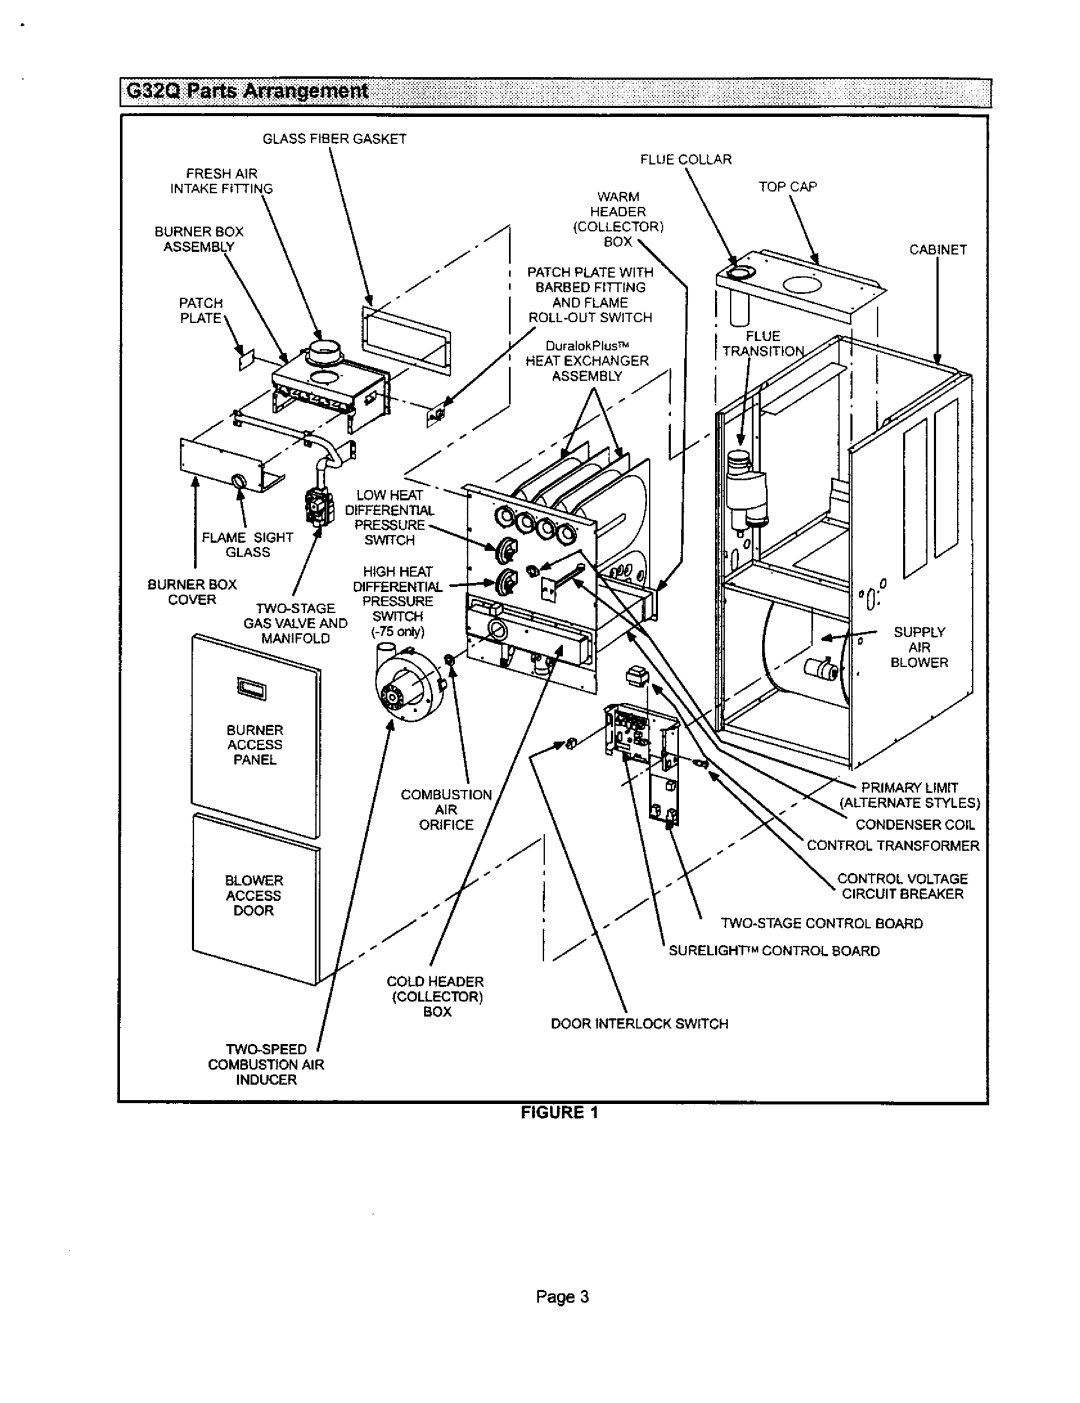 Lennox International Inc G32Q3-75, G32Q3-100, G32Q5-125, G32Q5-100, G32Q4-125, G32Q4-100 installation instructions Page, Lboard 